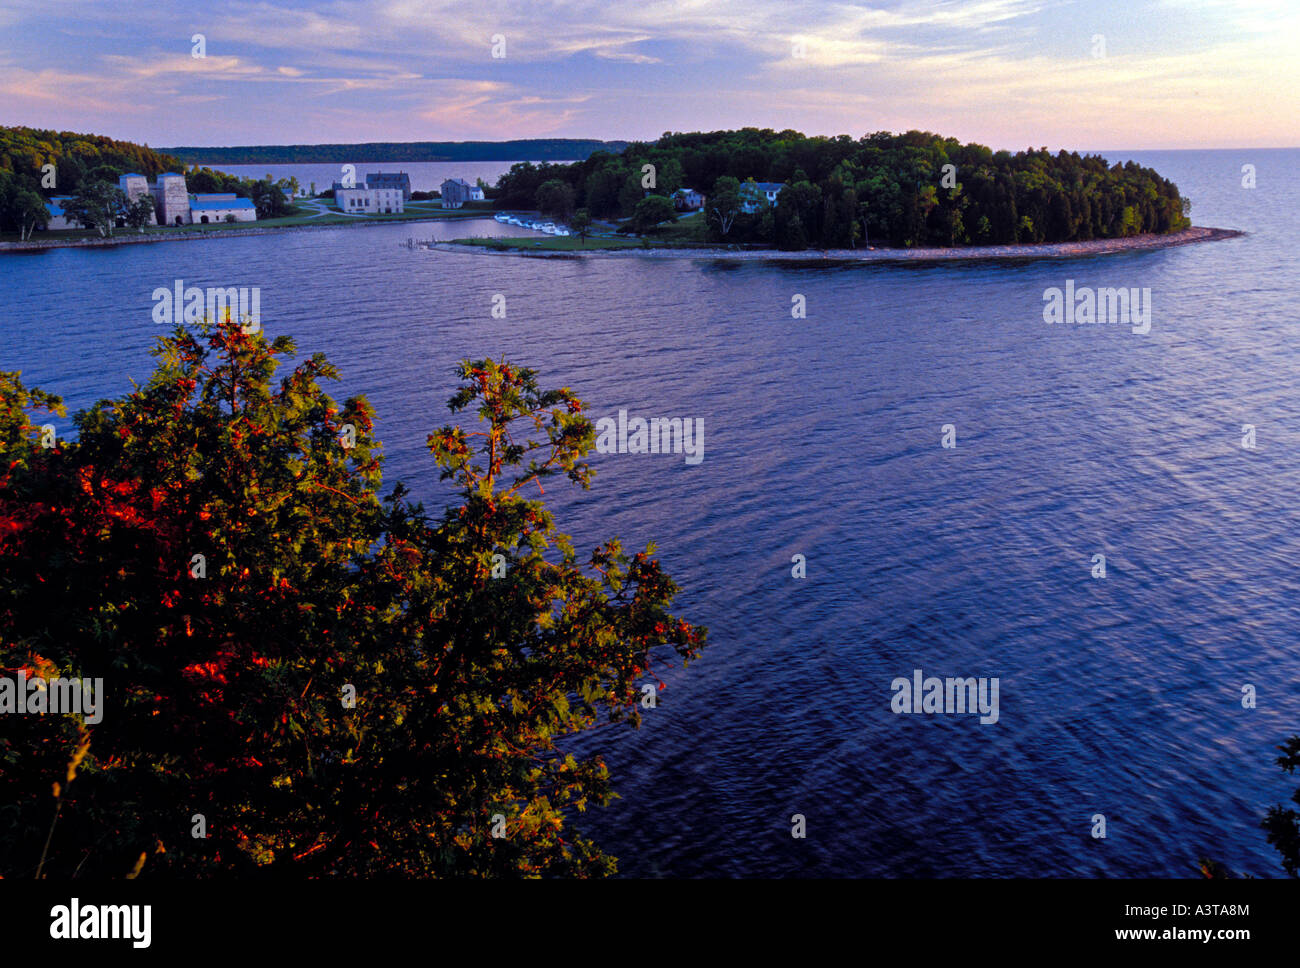 BUILDINGS AT FAYETTE STATE HISTORIC PARK ON THE GARDEN PENINSULA SEEN FROM A BLUFF ON SNAIL SHELL HARBOR Stock Photo